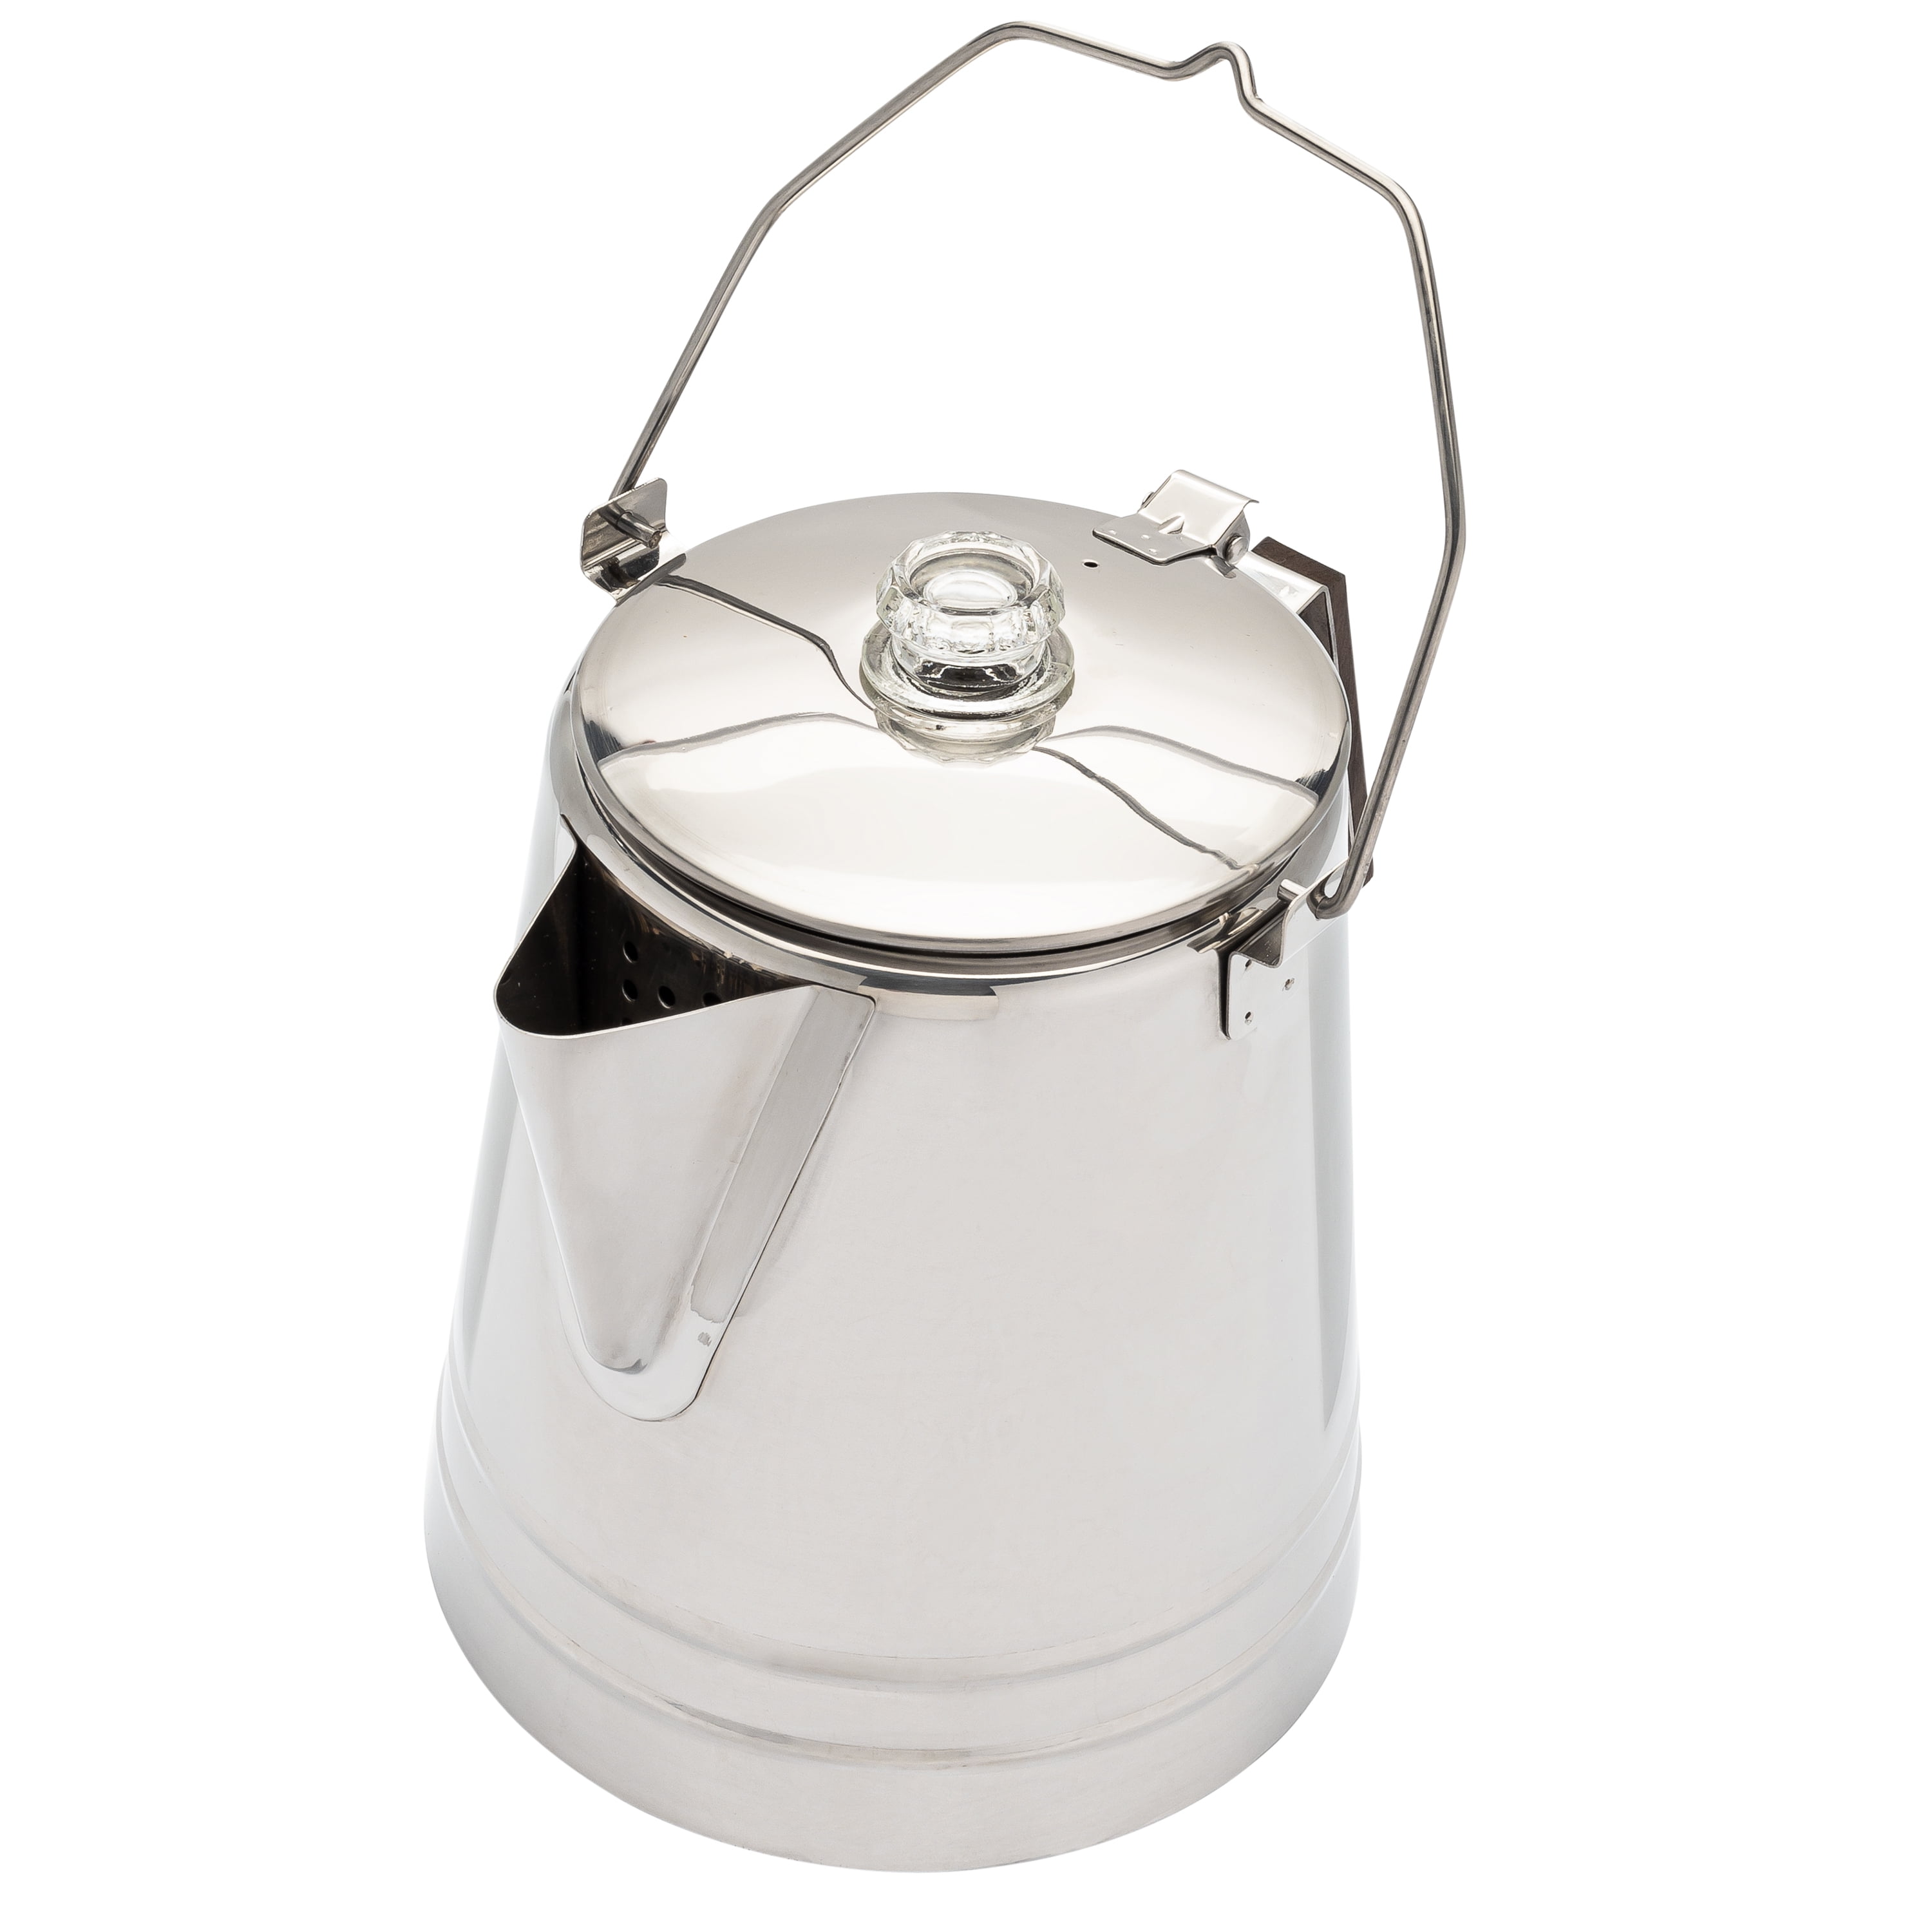 COLETTI Classic Camping Coffee Percolator - Camping Coffee Pot - 12 Cup  Enamelware Percolator Coffee Pot for Campsite, Cabin, Hunting, Fishing,  Backpacking, & RV